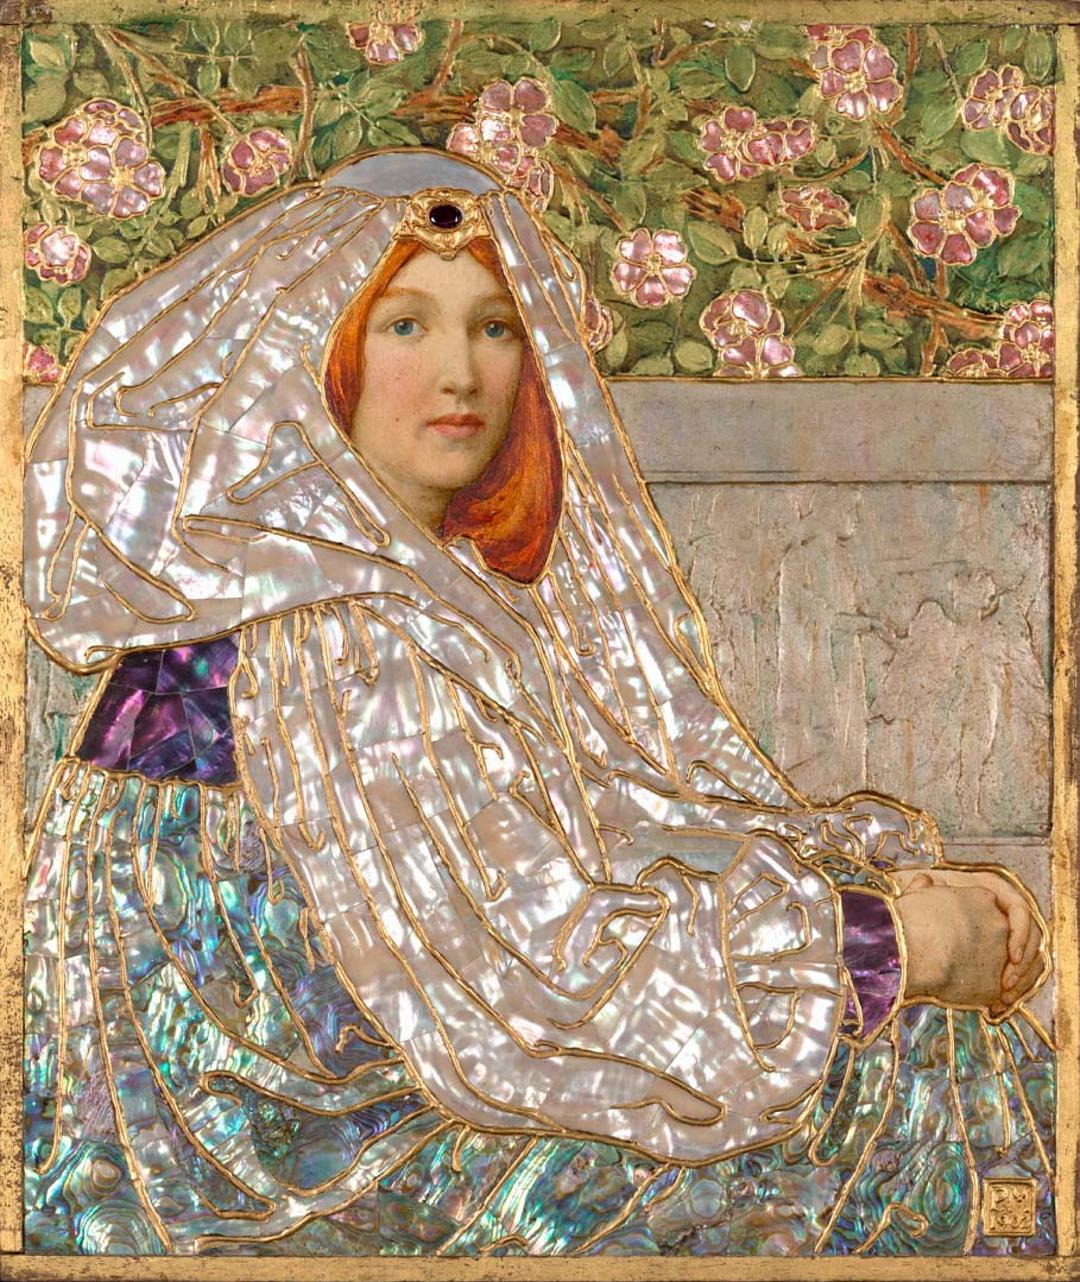 A painted portrait of an auburn-haired young woman, shrouded in garments made from mother of pearl and semi-precious stones.